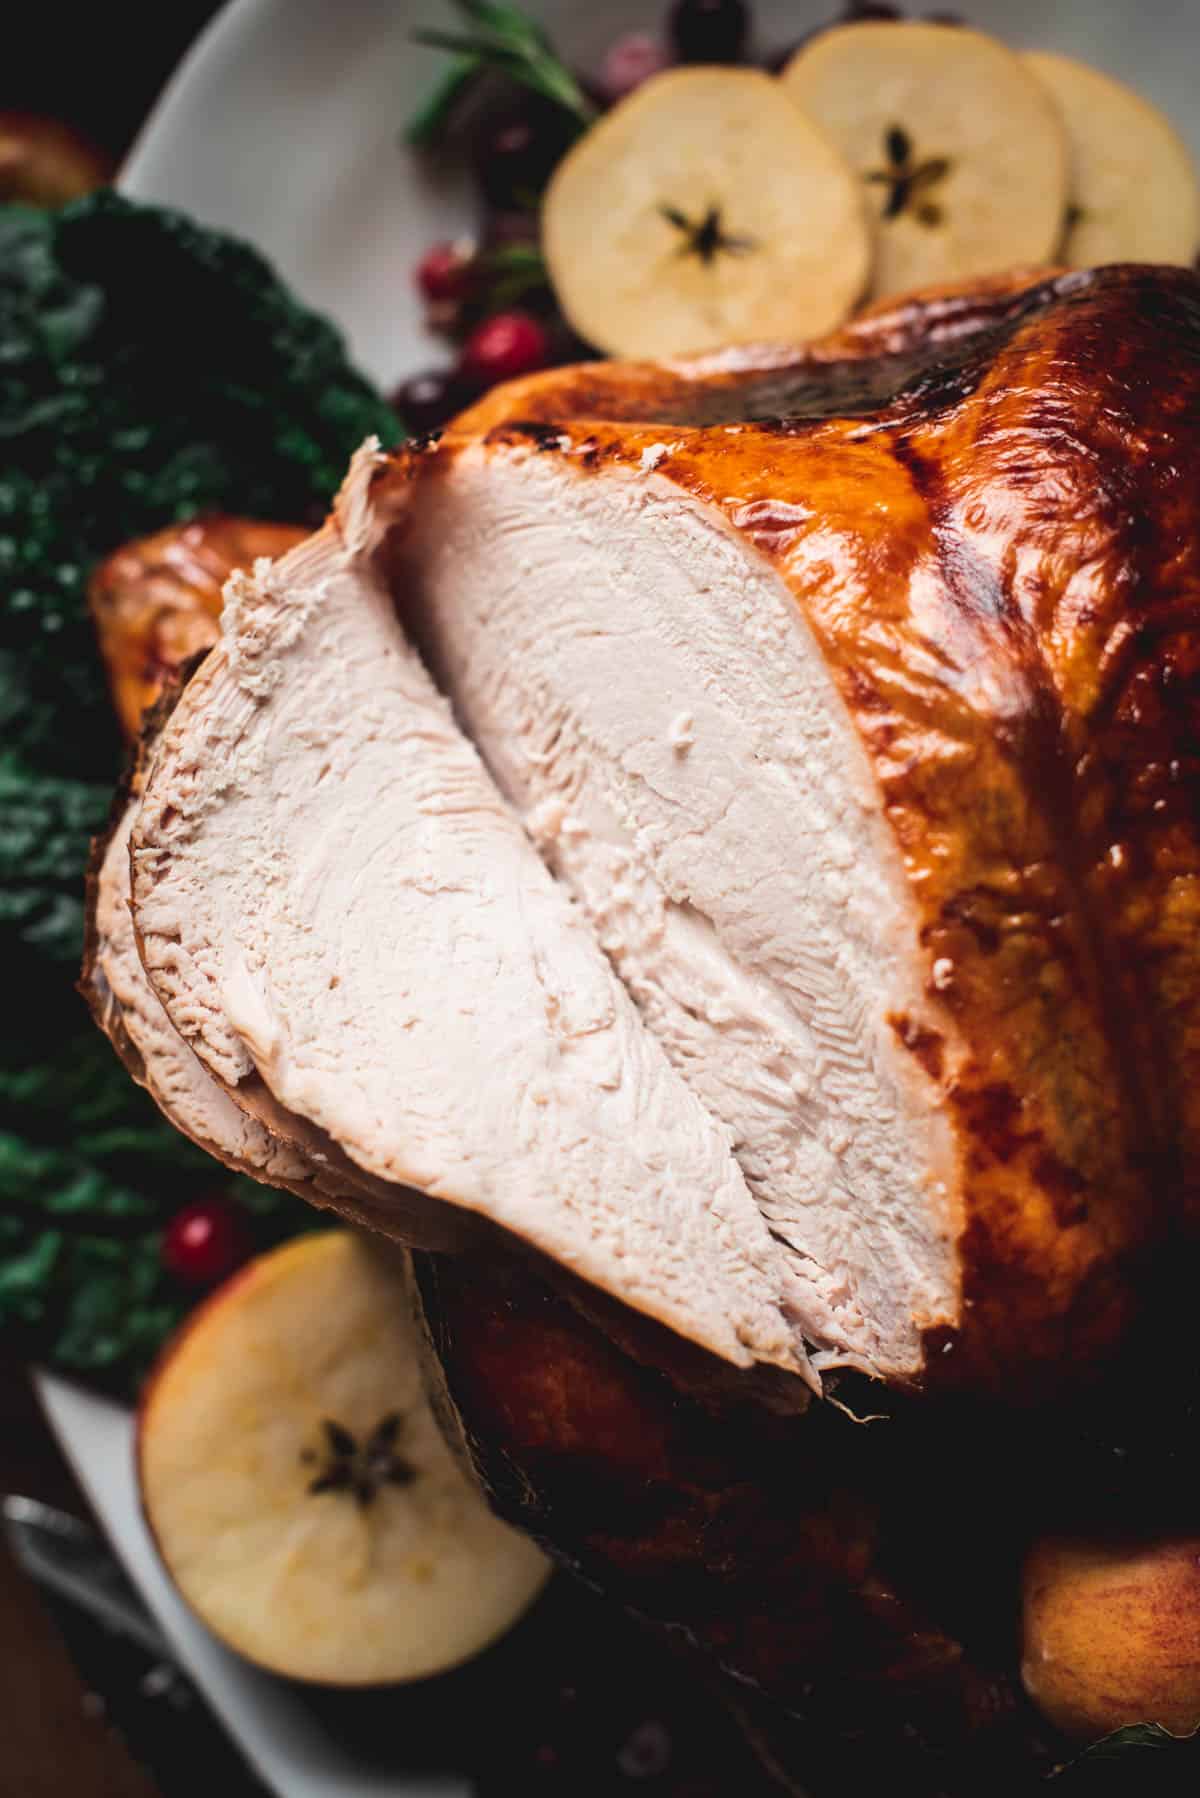 Close up of perfectly baked turkey. The skin is brown and crispy, it has been sliced into so you can see the moist white meat underneath.